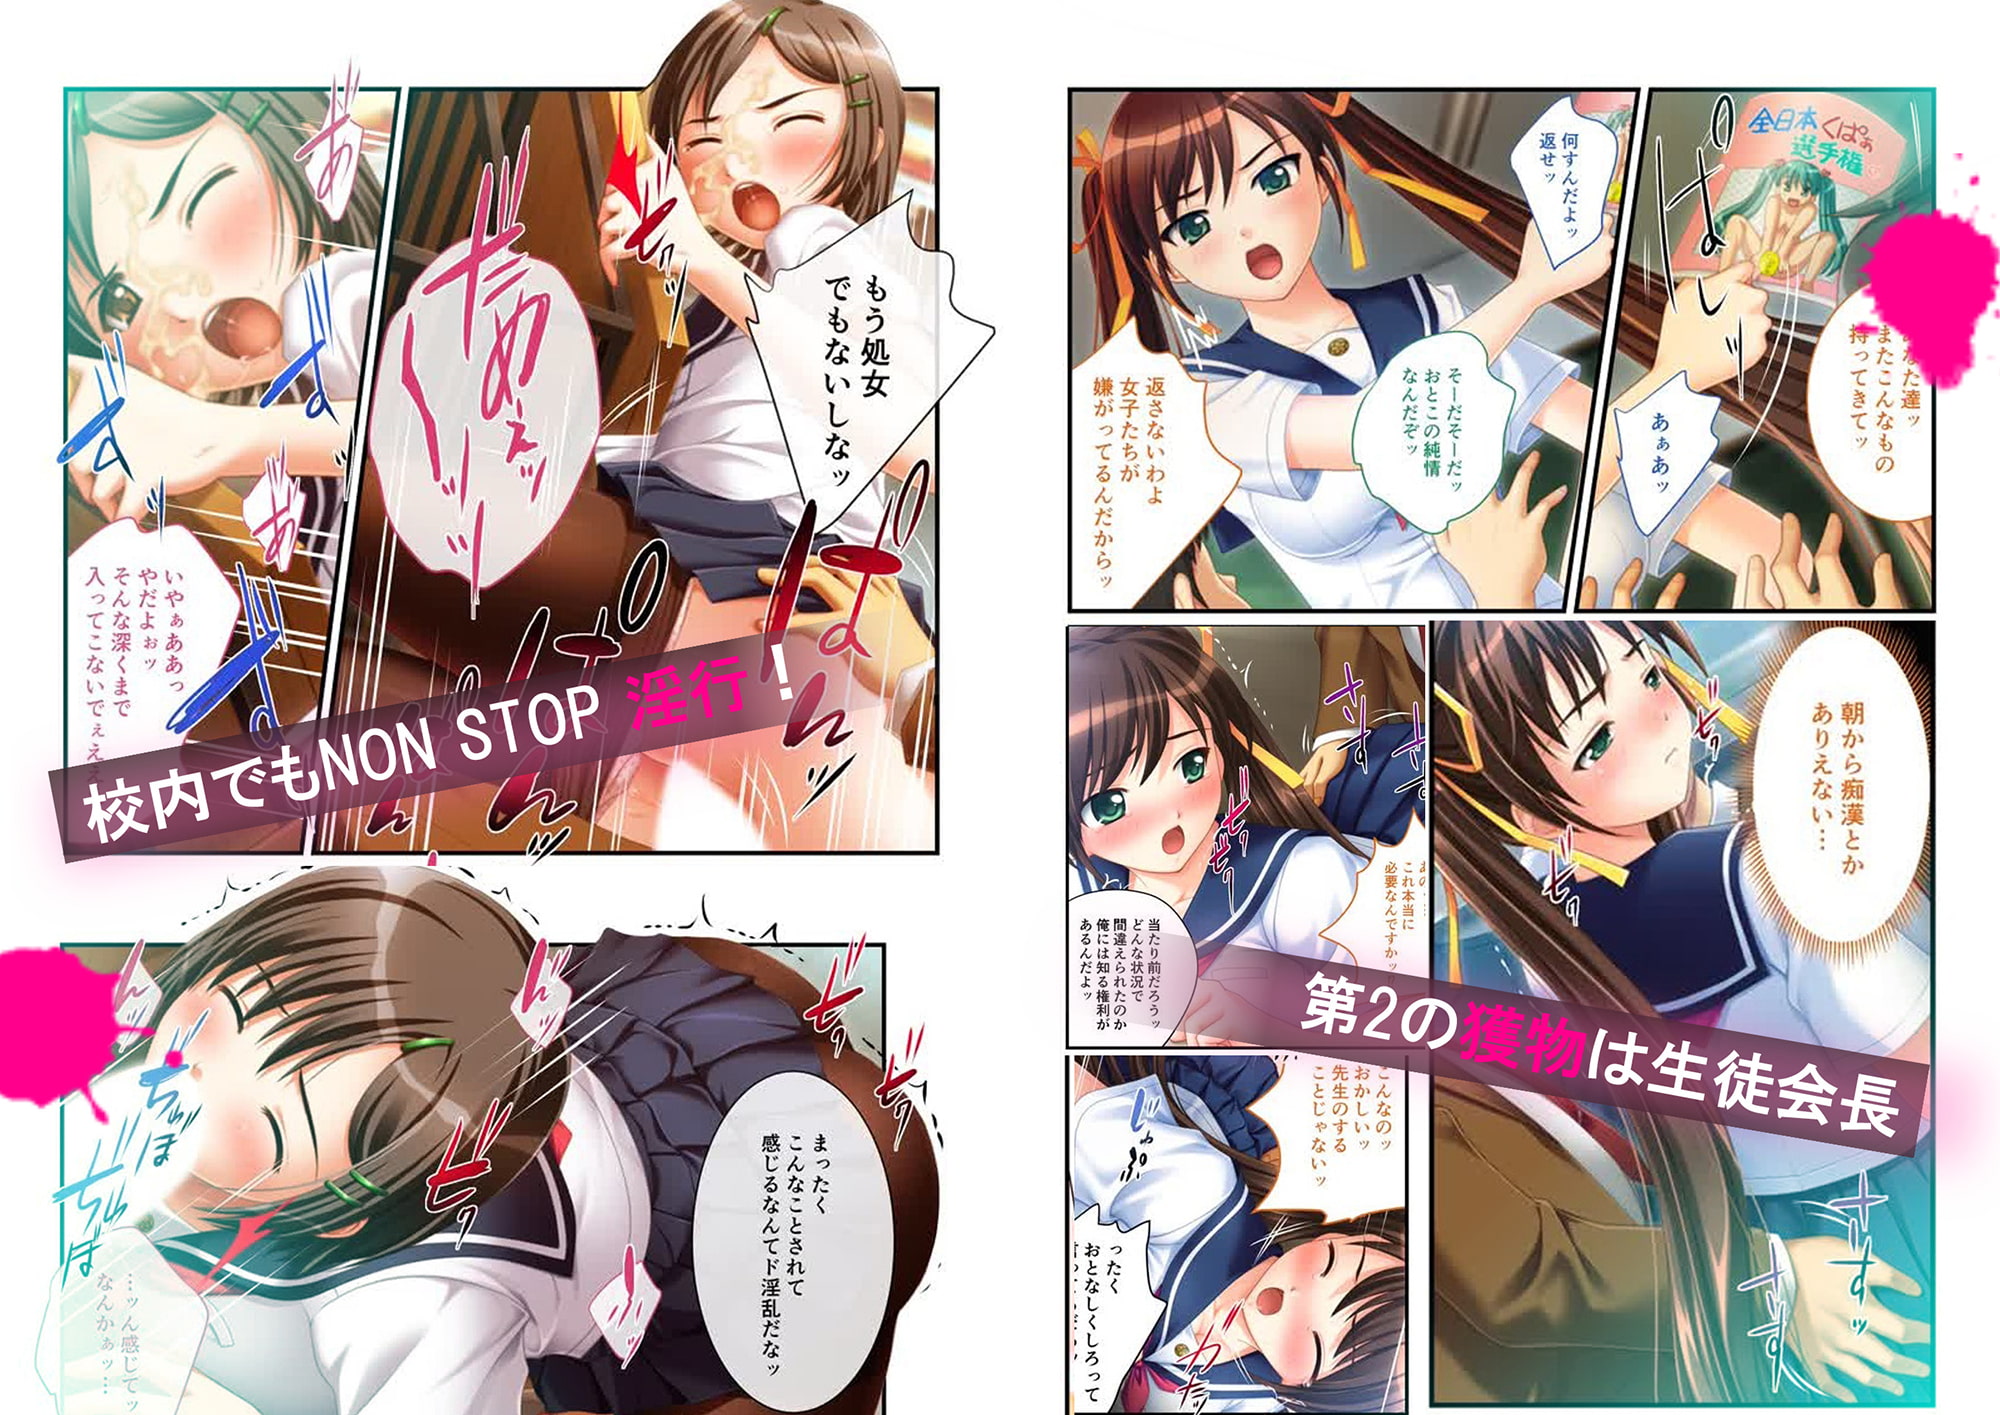 Schoolgirls Framed (2) ~Groping Charges Acquitted~ [Full Color Comic Ver]